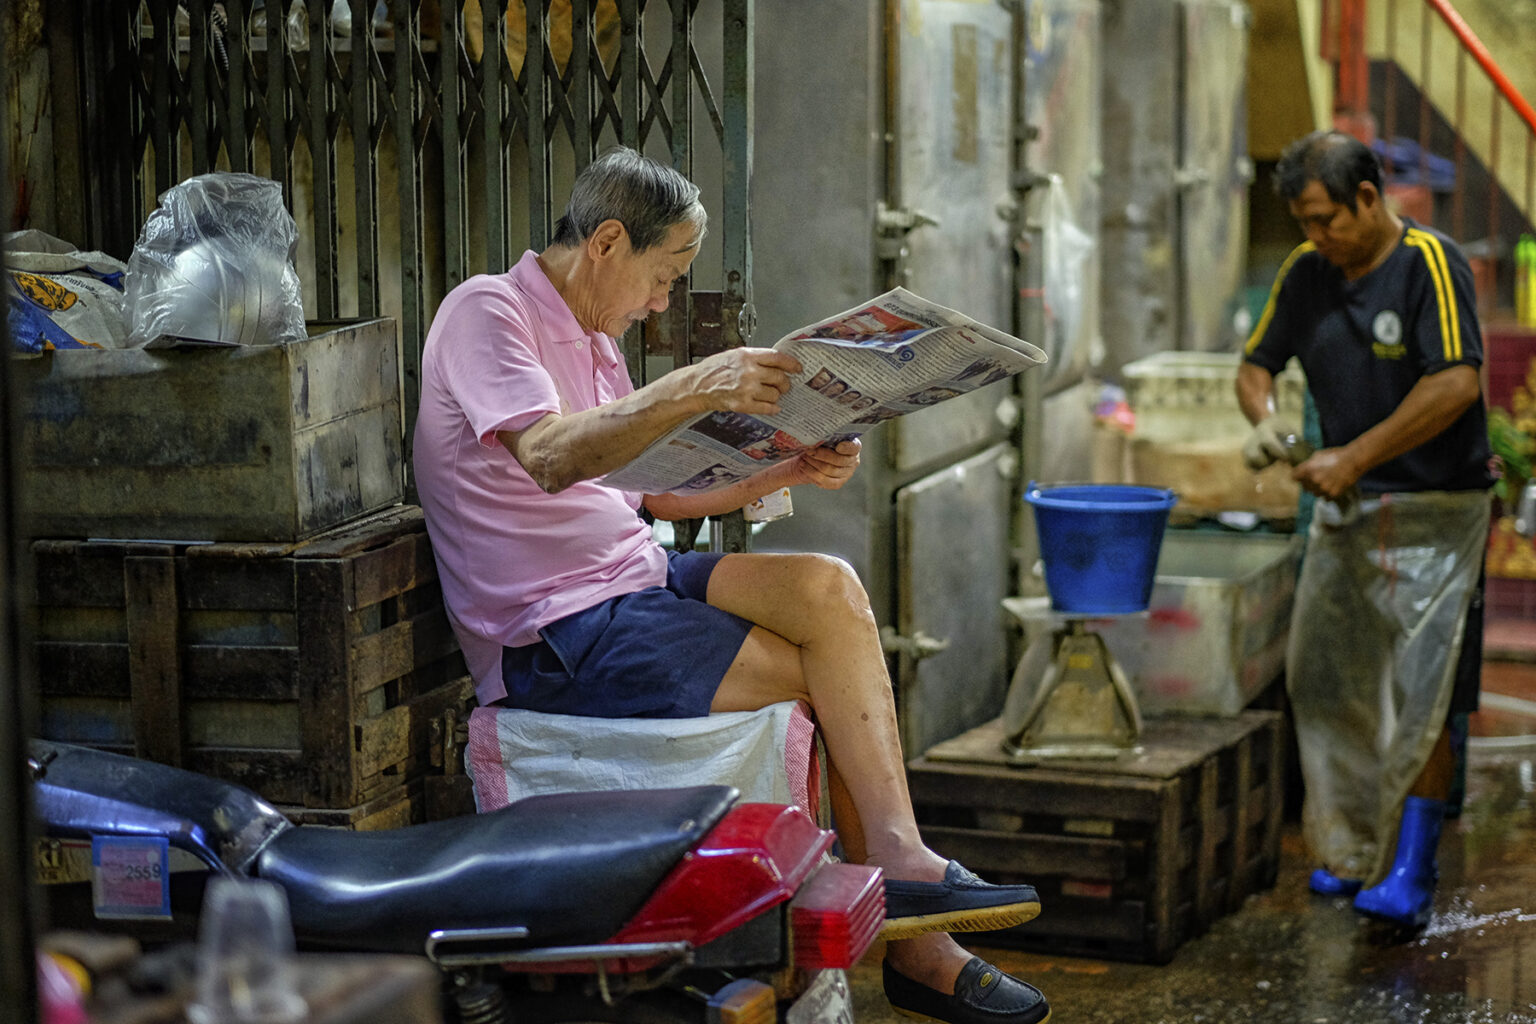 Old man sitting on a crate in a back alley while is reading the newspaper. Someone in the background is cleaning fish before throwing it in a bucket on the scale.